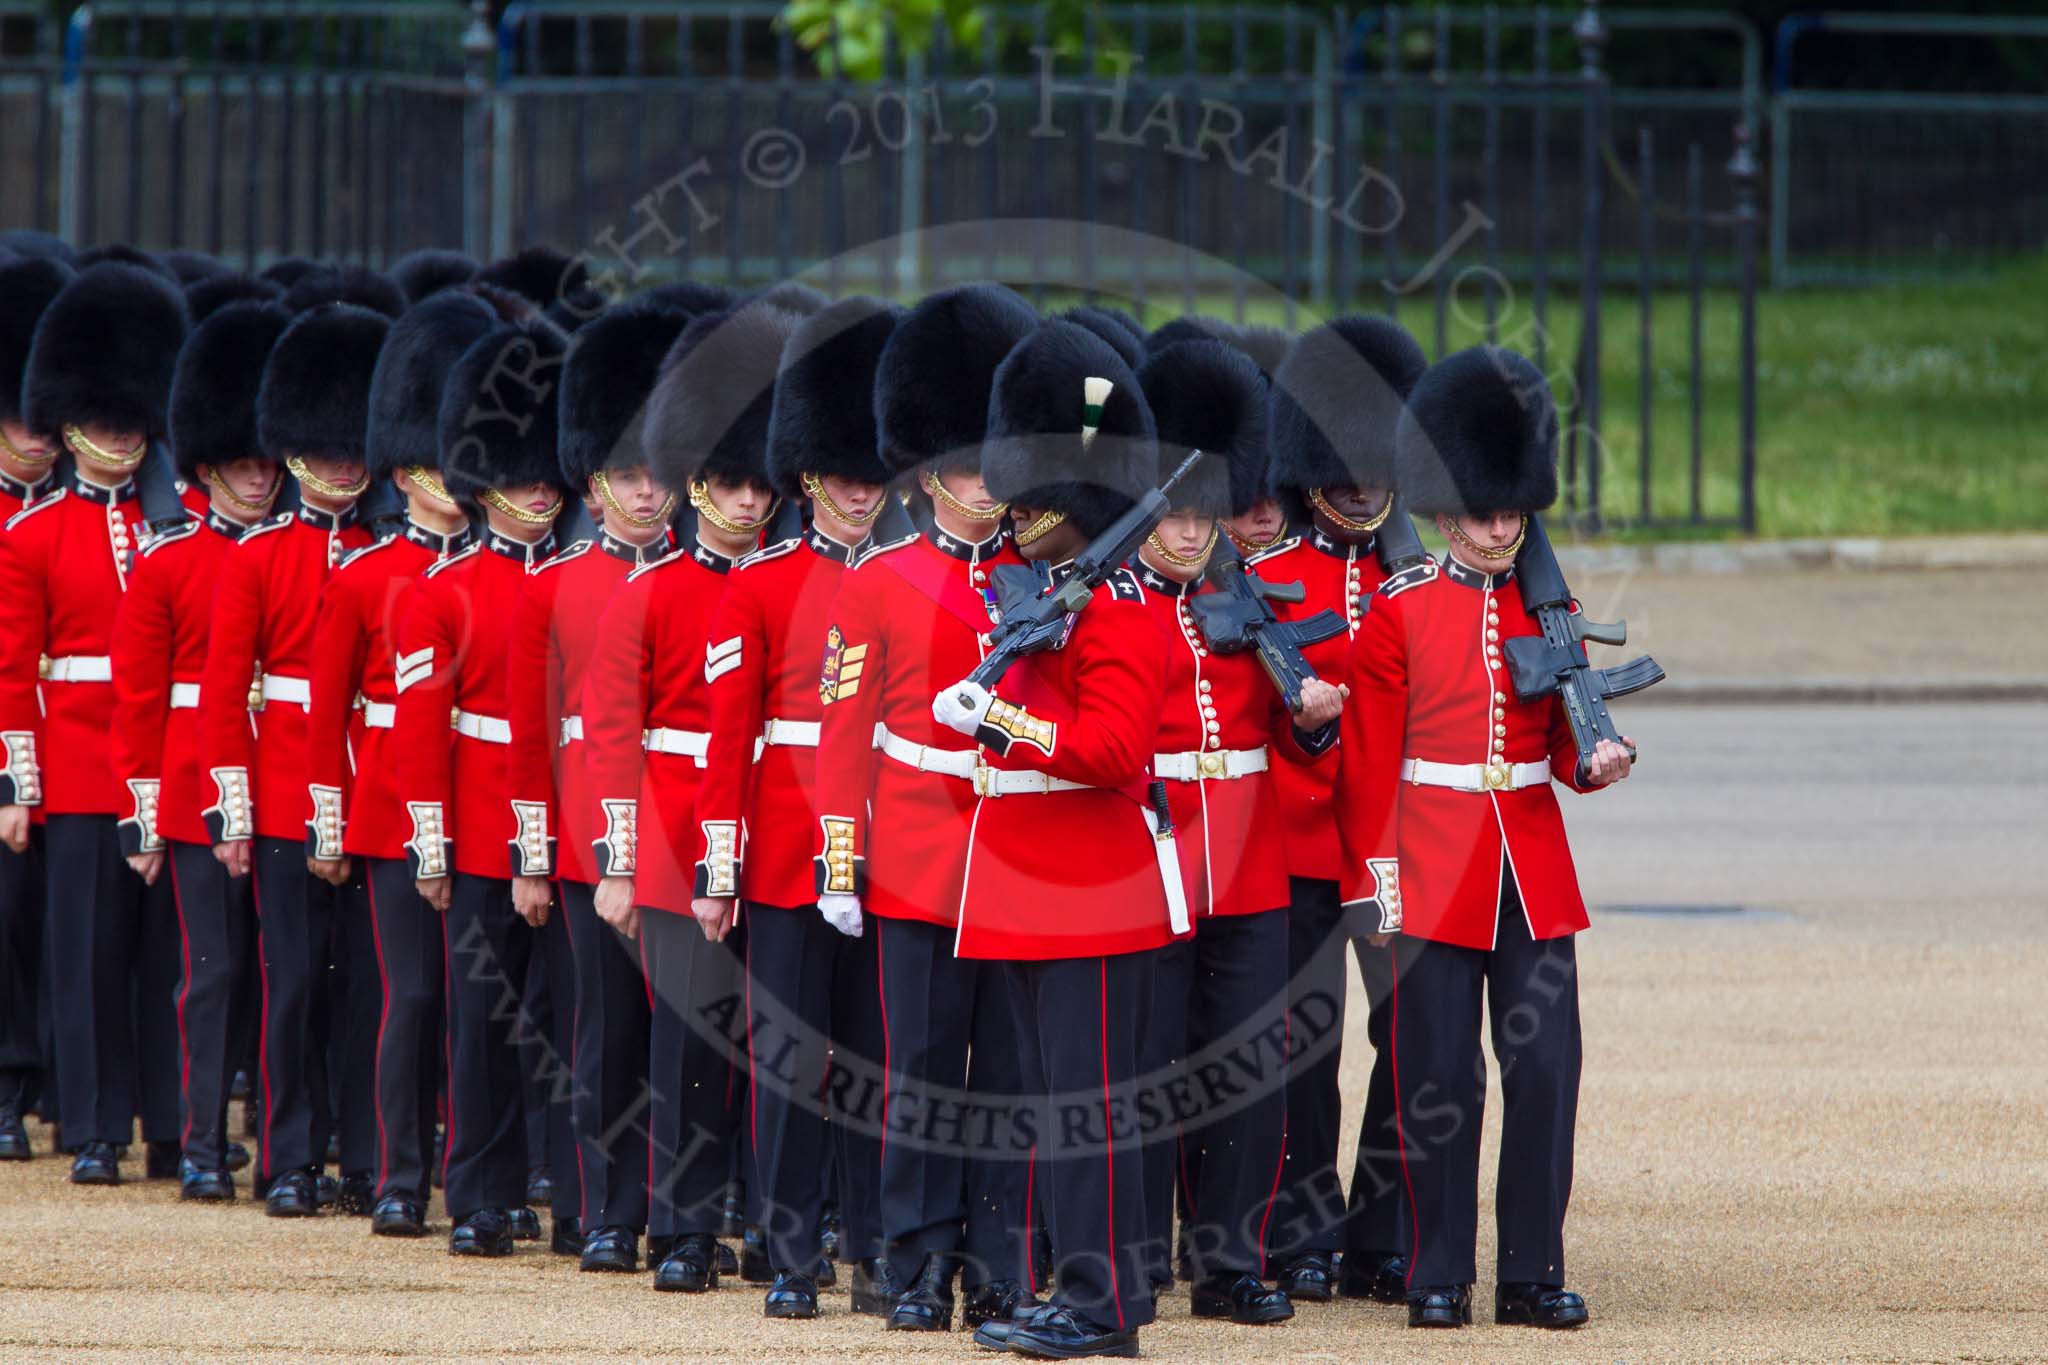 The Colonel's Review 2013: No. 3 Guard, 1st Battalion Welsh Guards, getting into position on Horse Guards Parade..
Horse Guards Parade, Westminster,
London SW1,

United Kingdom,
on 08 June 2013 at 10:28, image #106